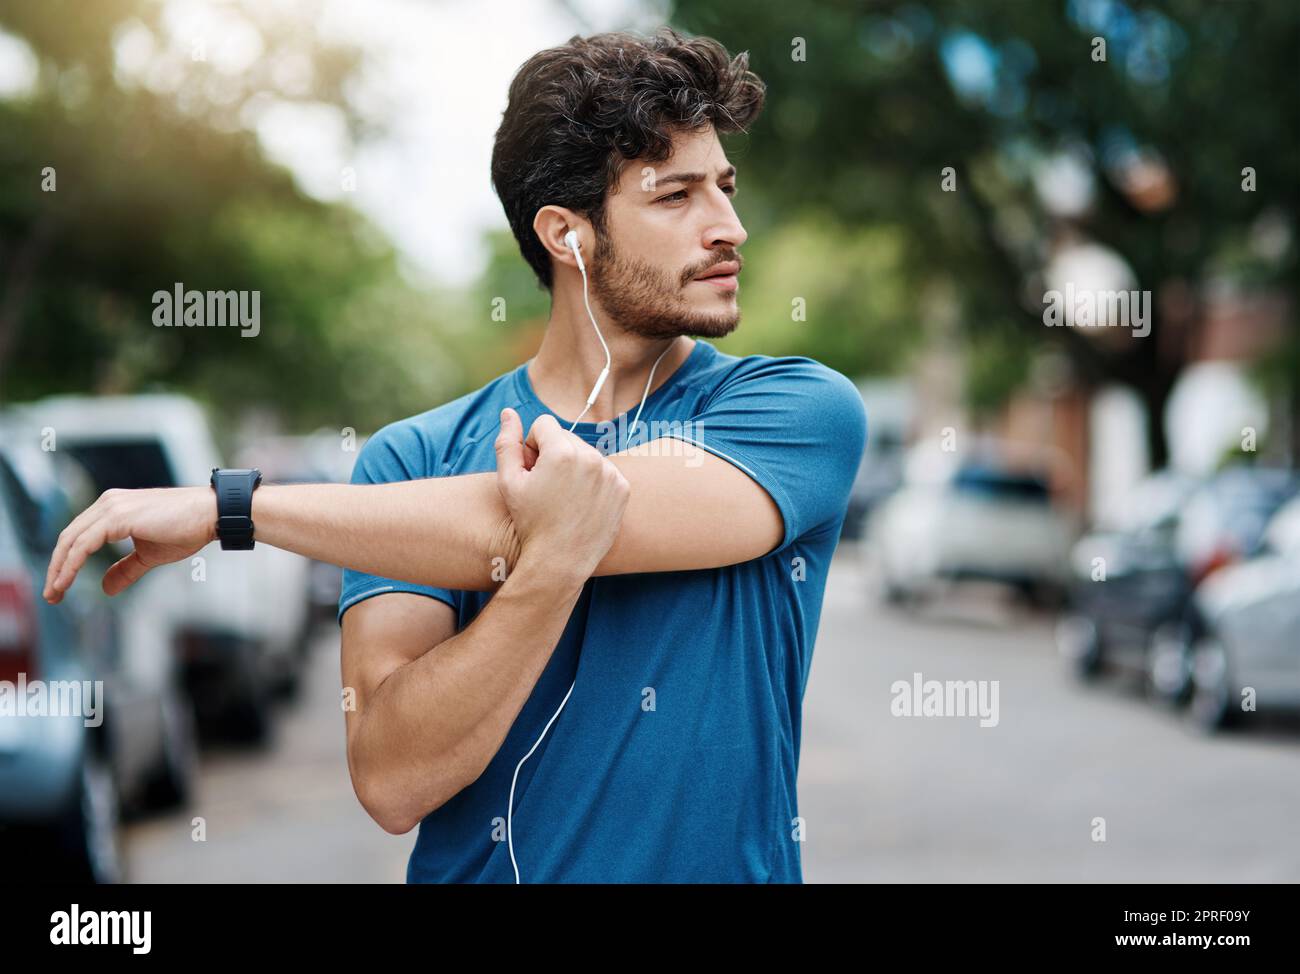 Theres a few people out on this beautiful day. a sporty young man stretching his arms while exercising outdoors. Stock Photo